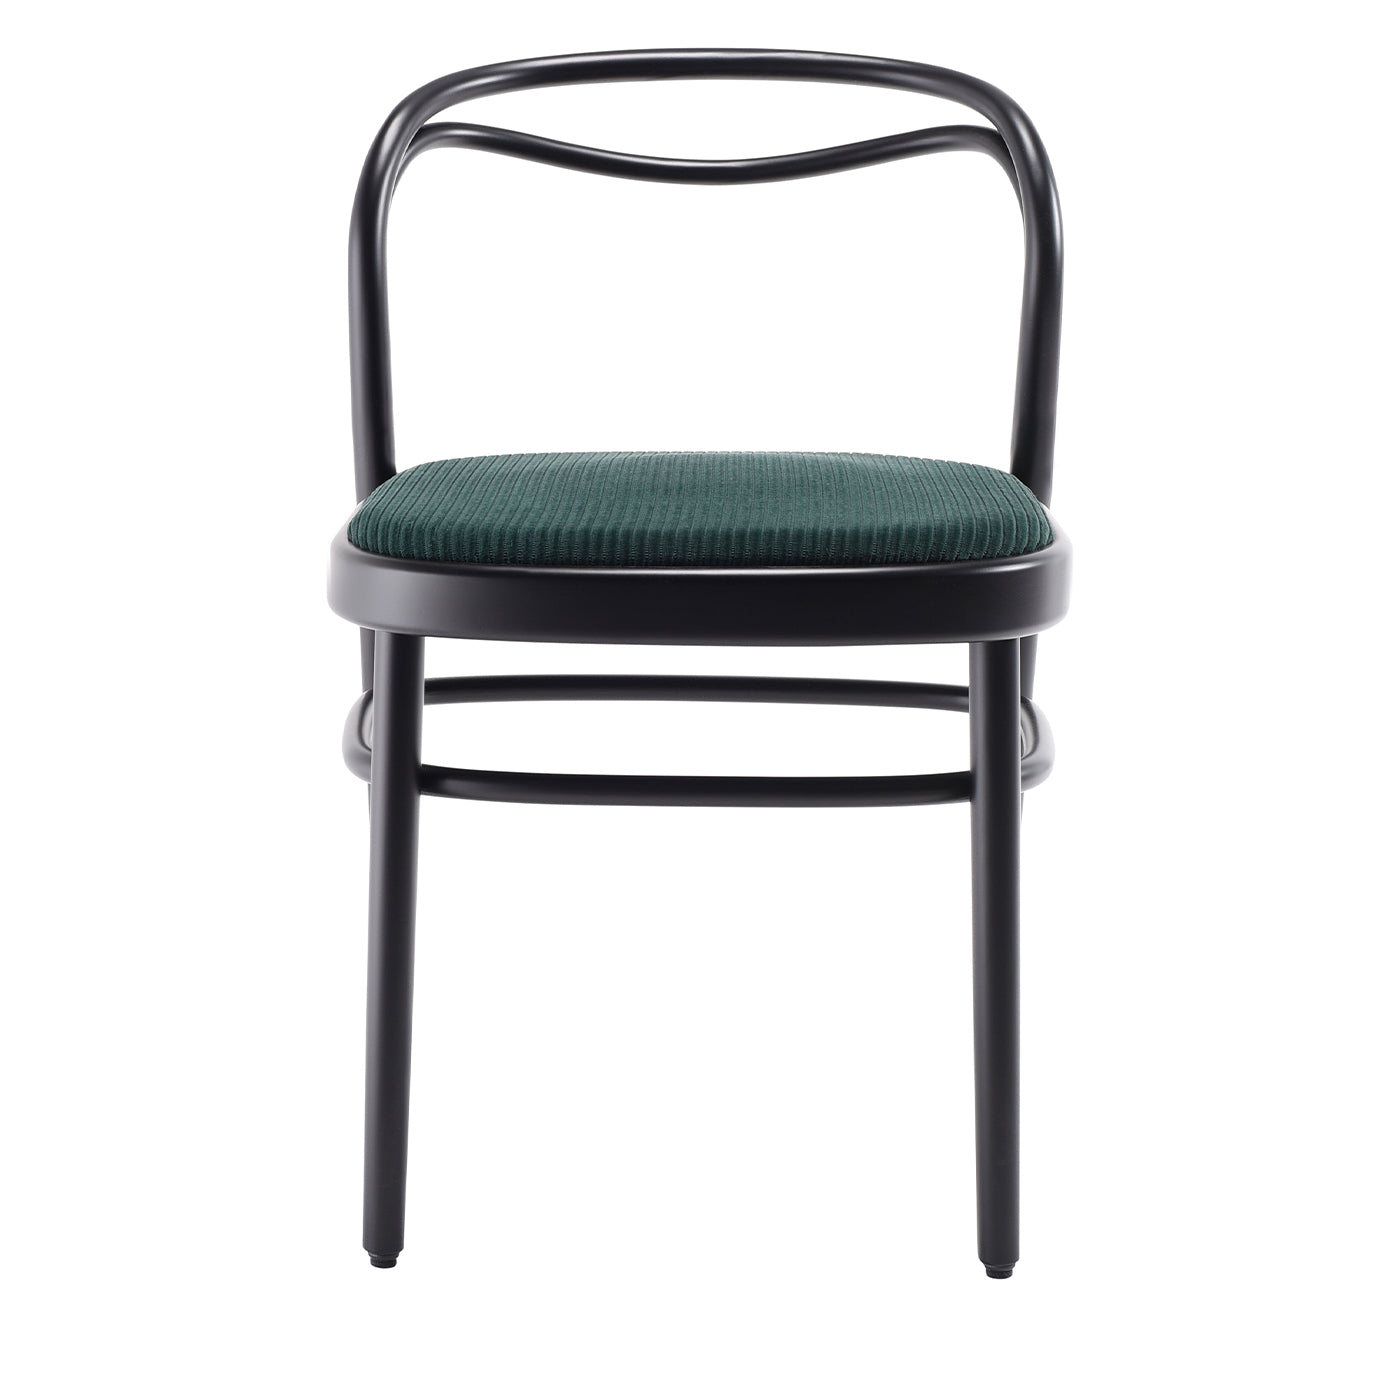 BEAULIEU chair with upholstered seat by PHILIPPE NIGRO - Alternative view 2